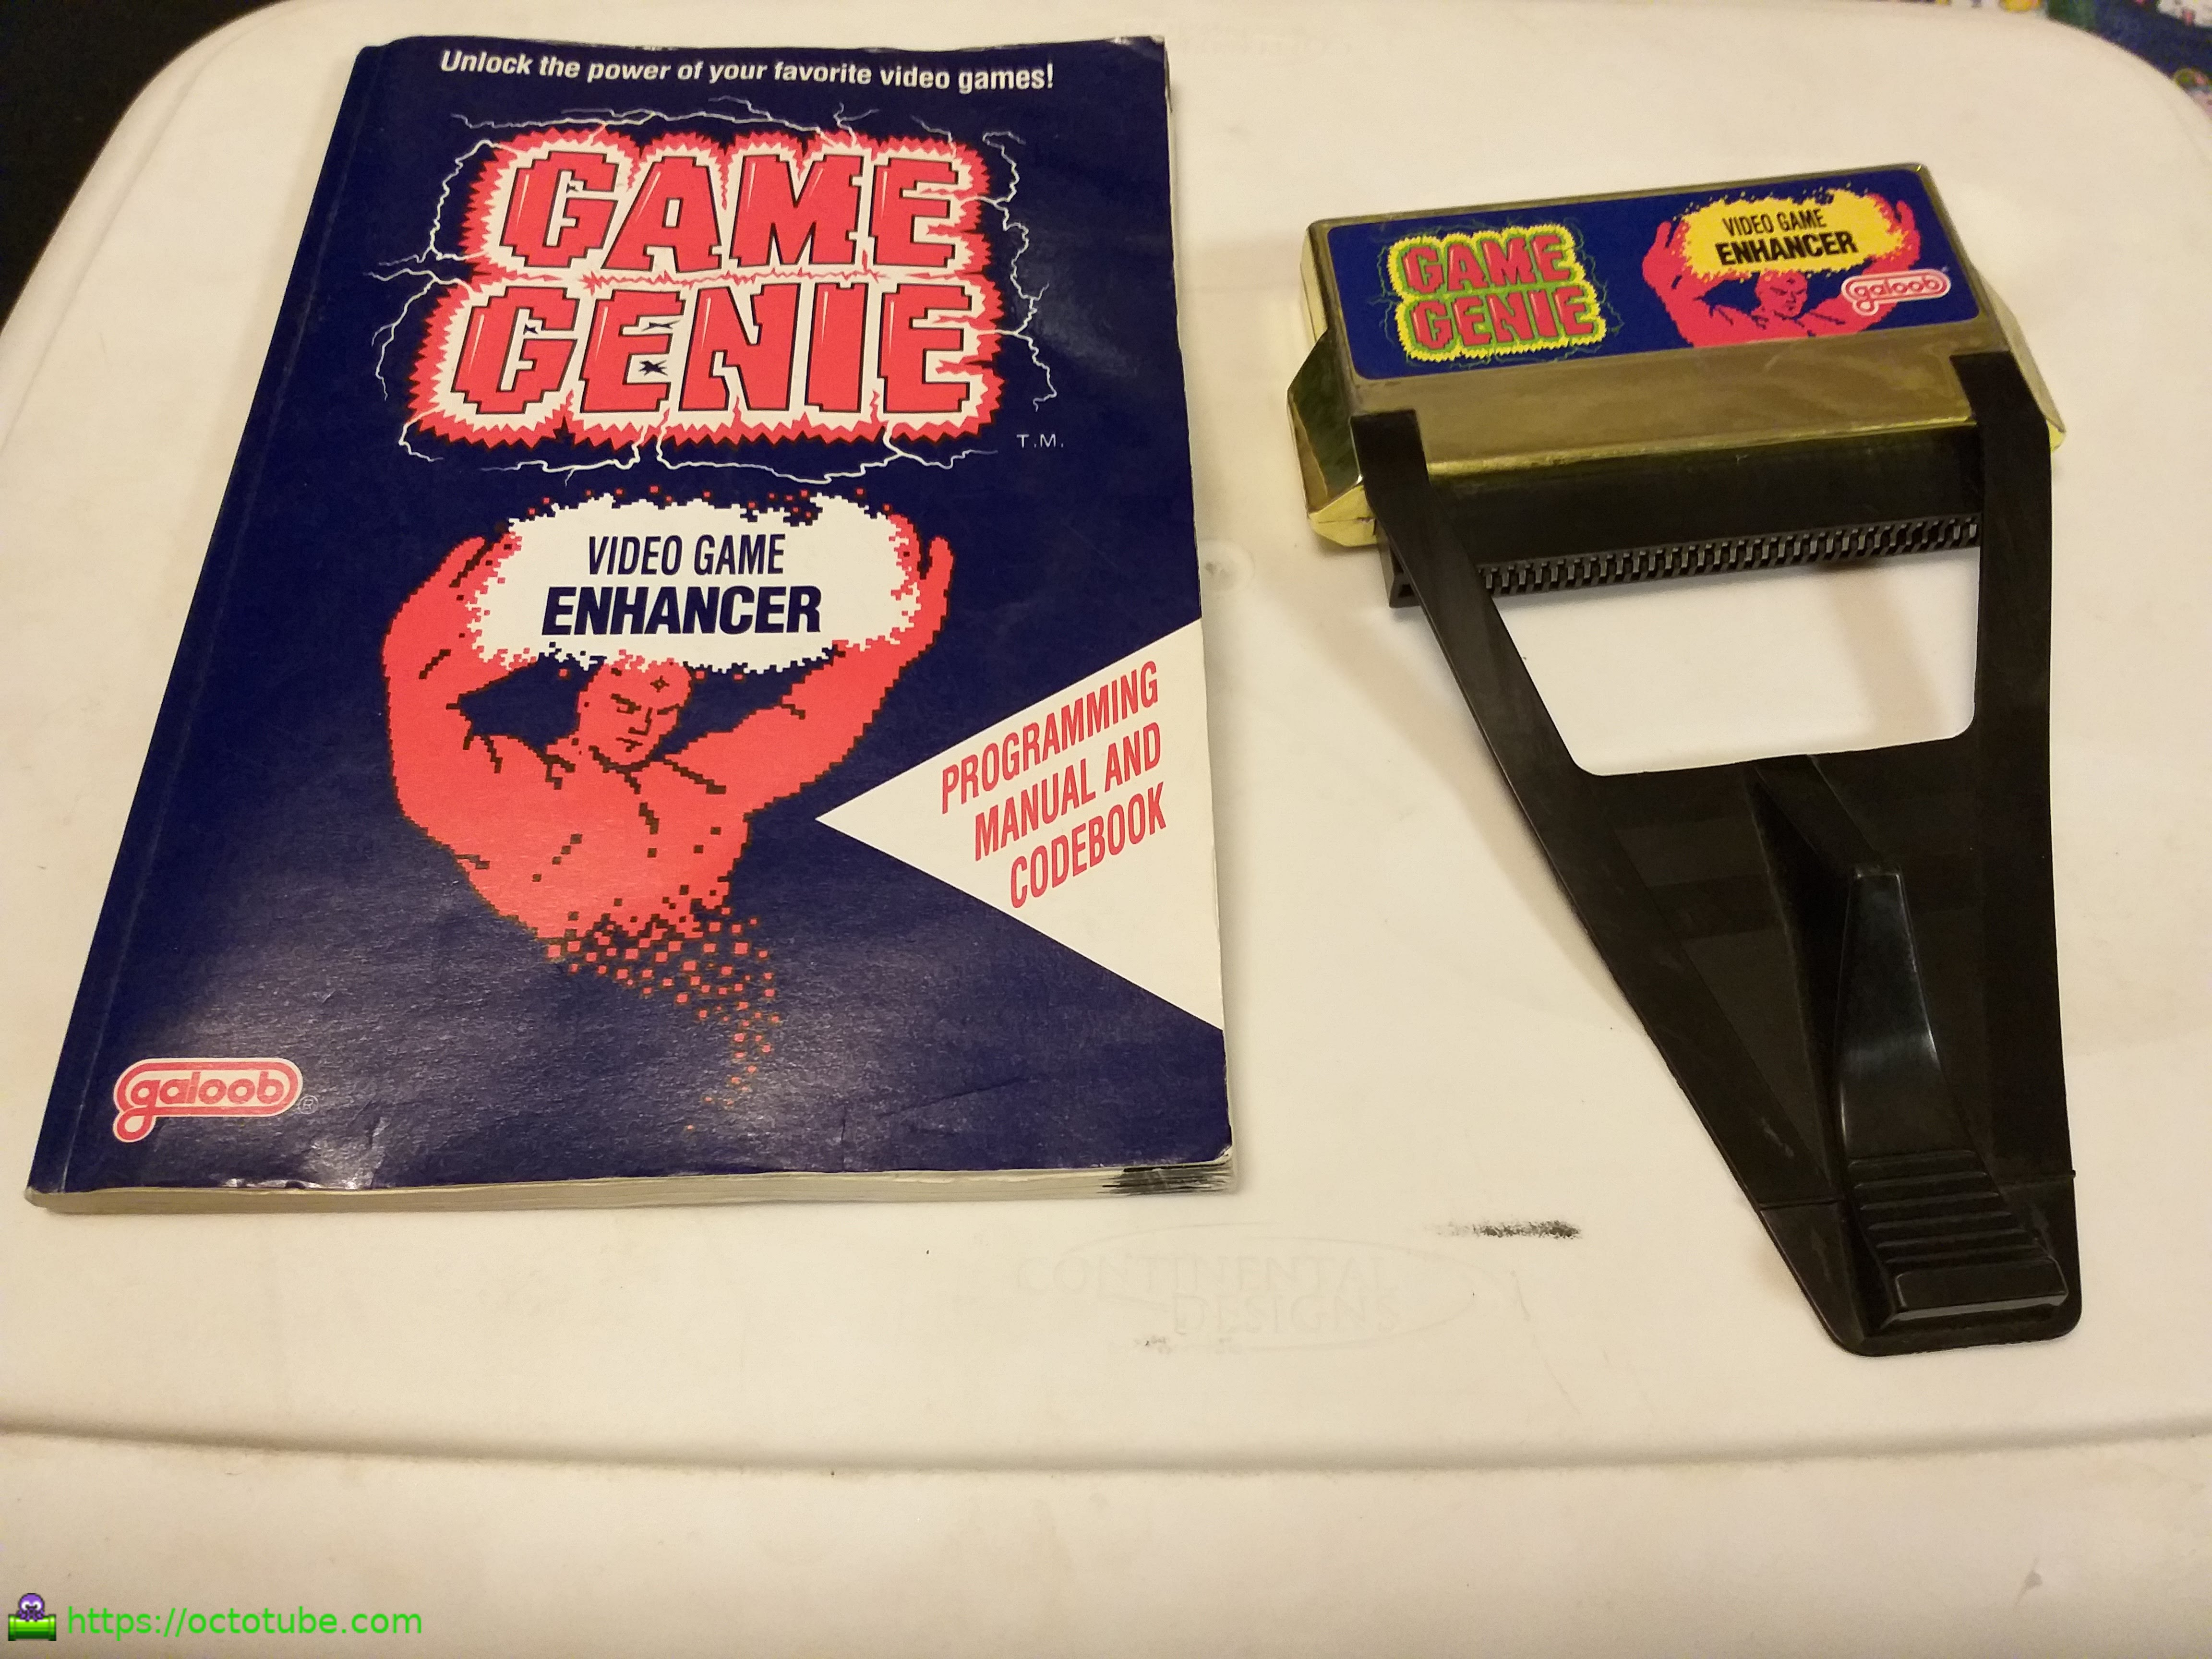 Game Genie. Out Runners game Genie.